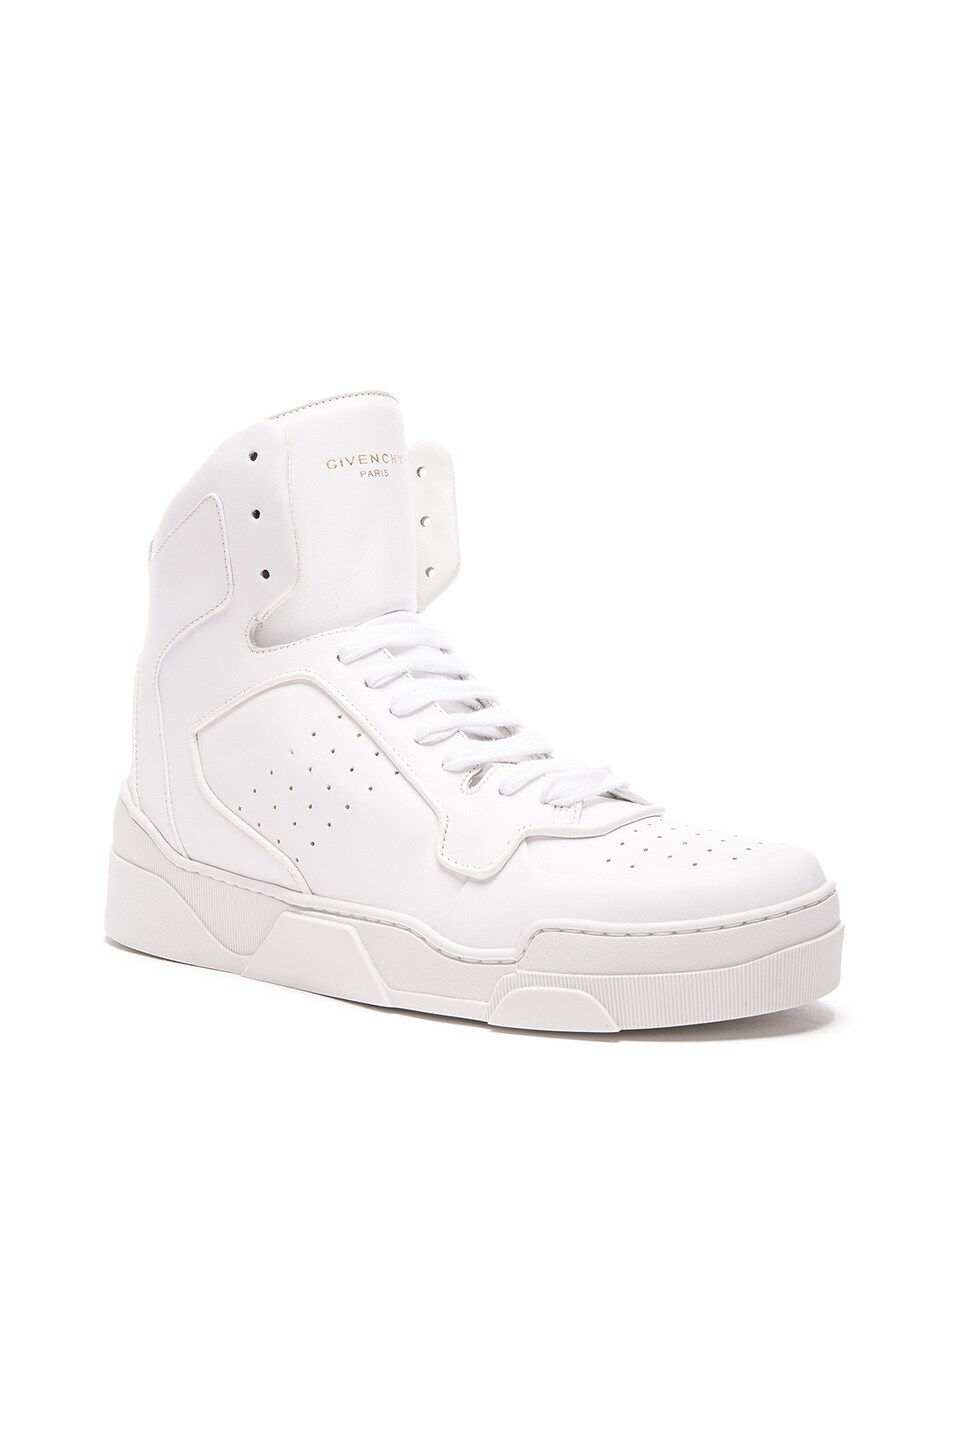 Image 1 of Givenchy Leather High Top Tyson Sneakers in White